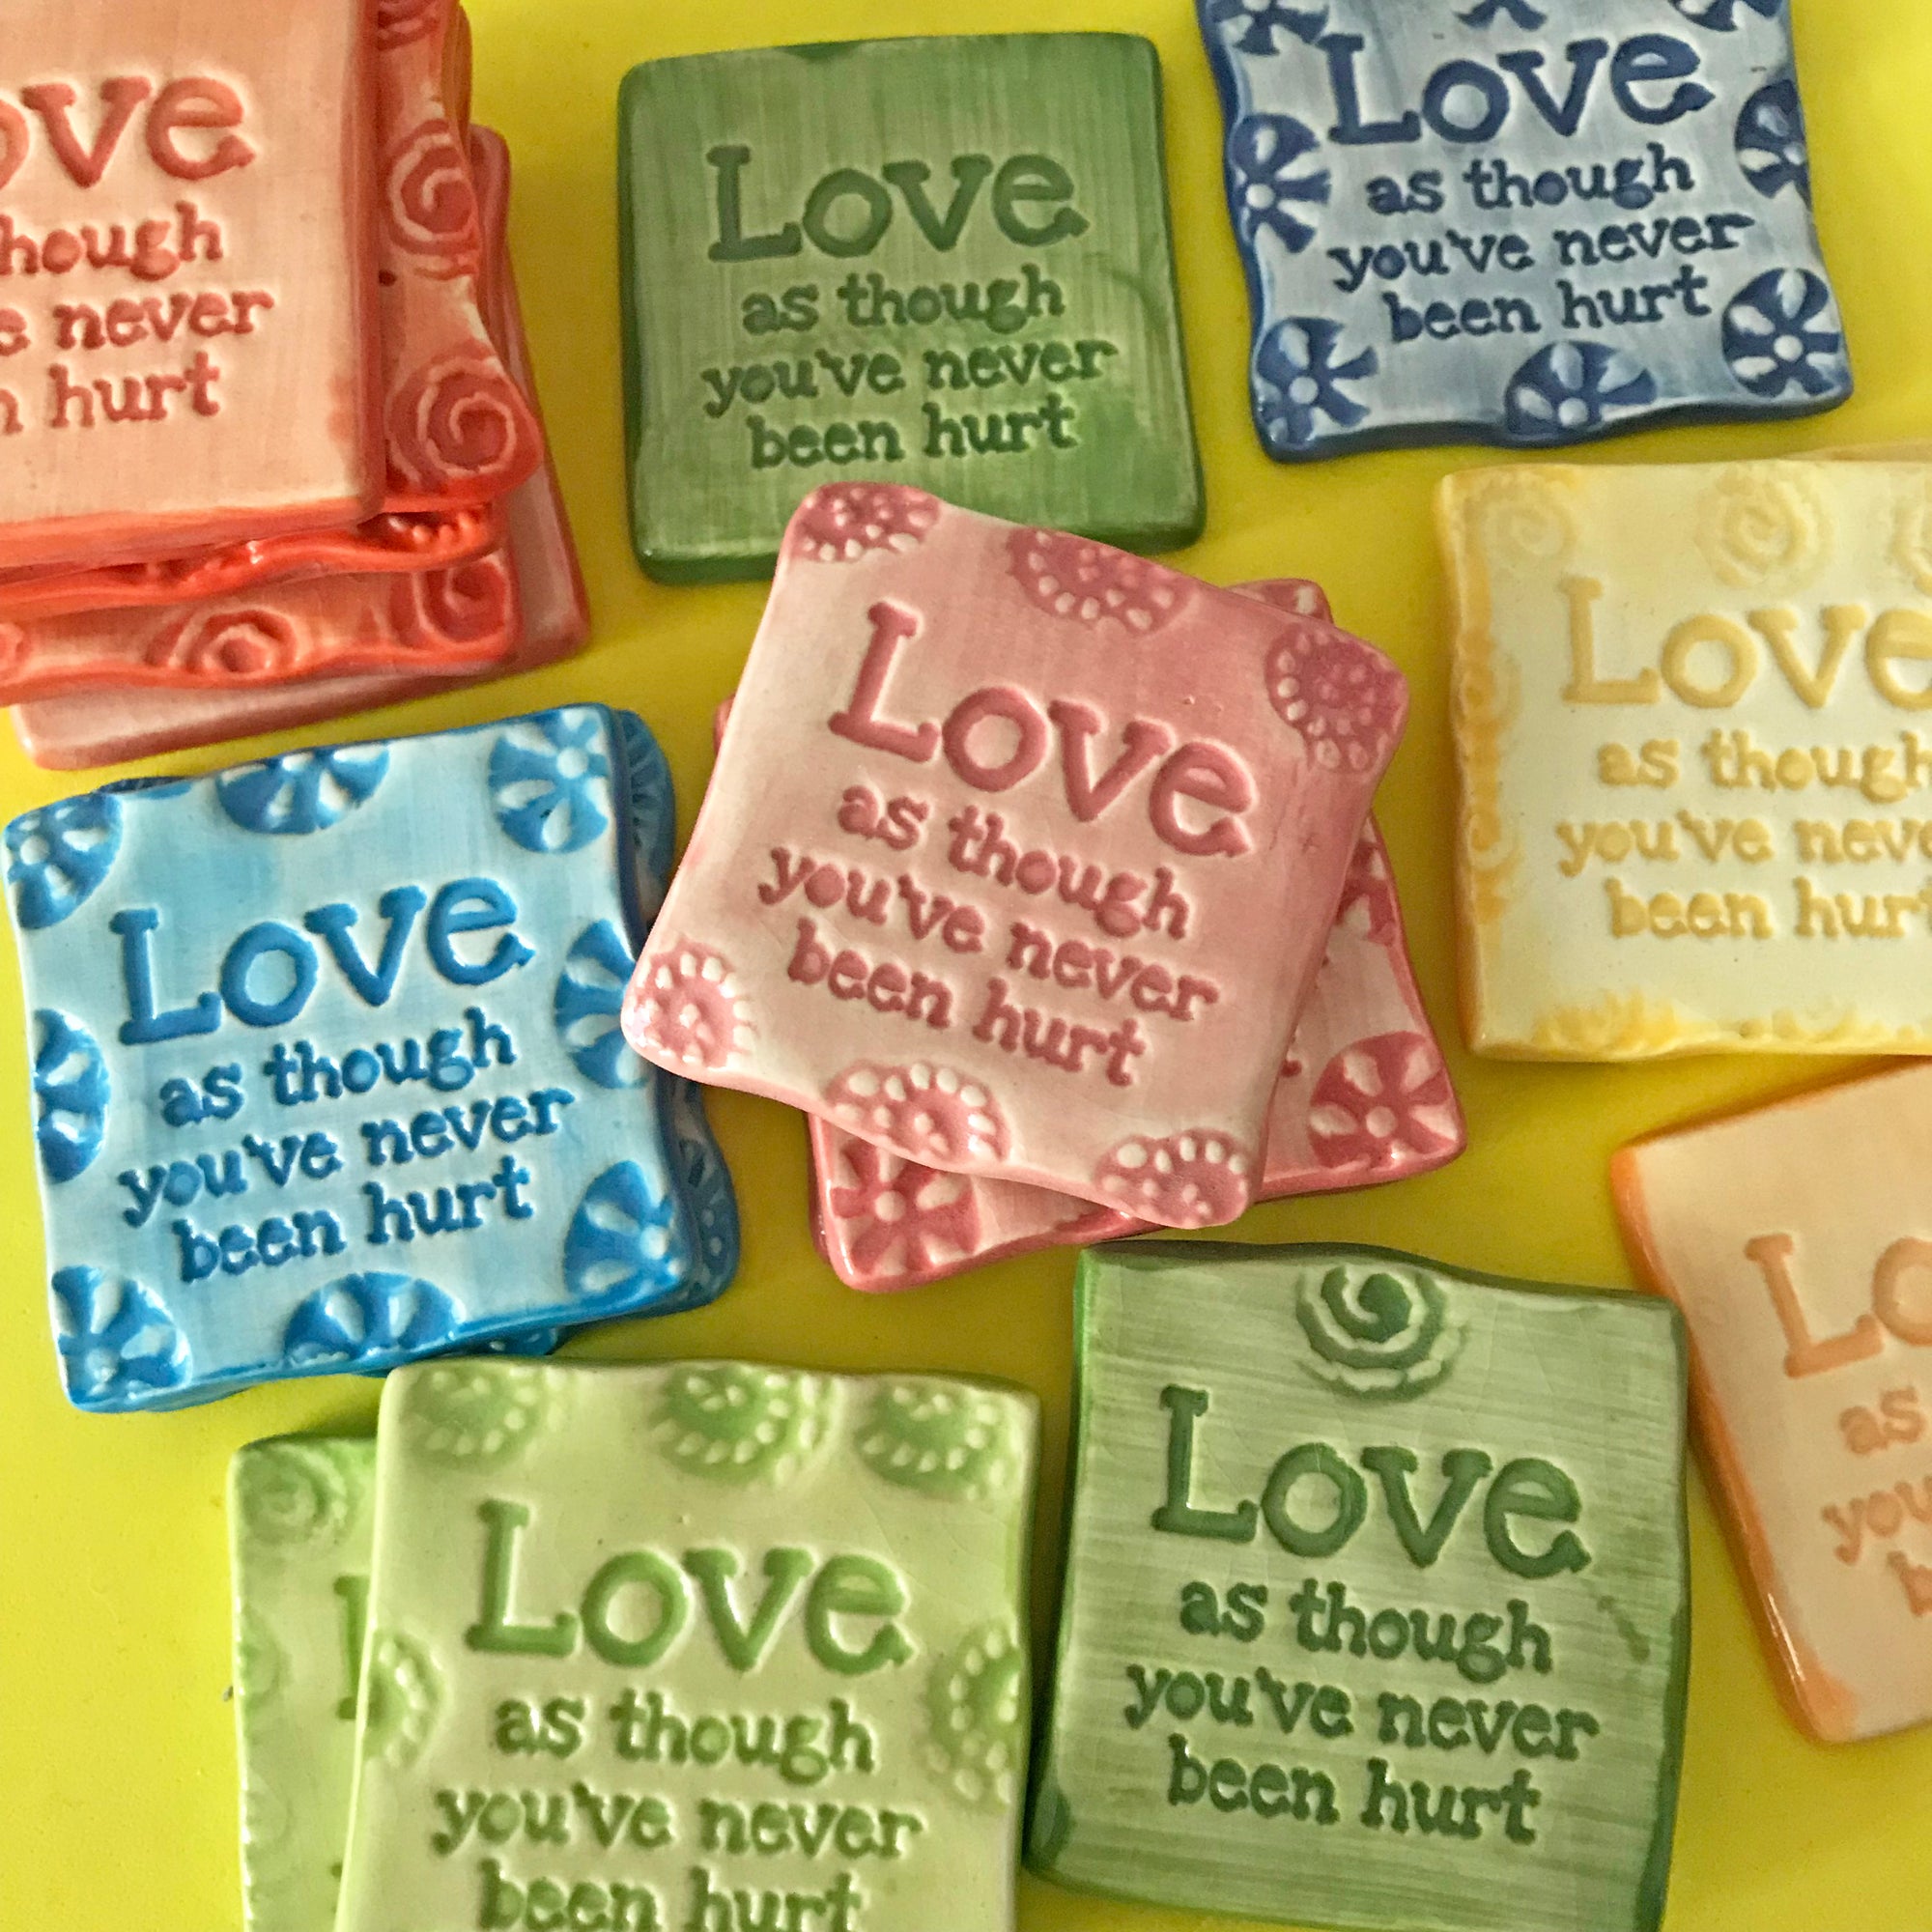 Hand made magnet with the phrase "Love as though you've never been hurt".  